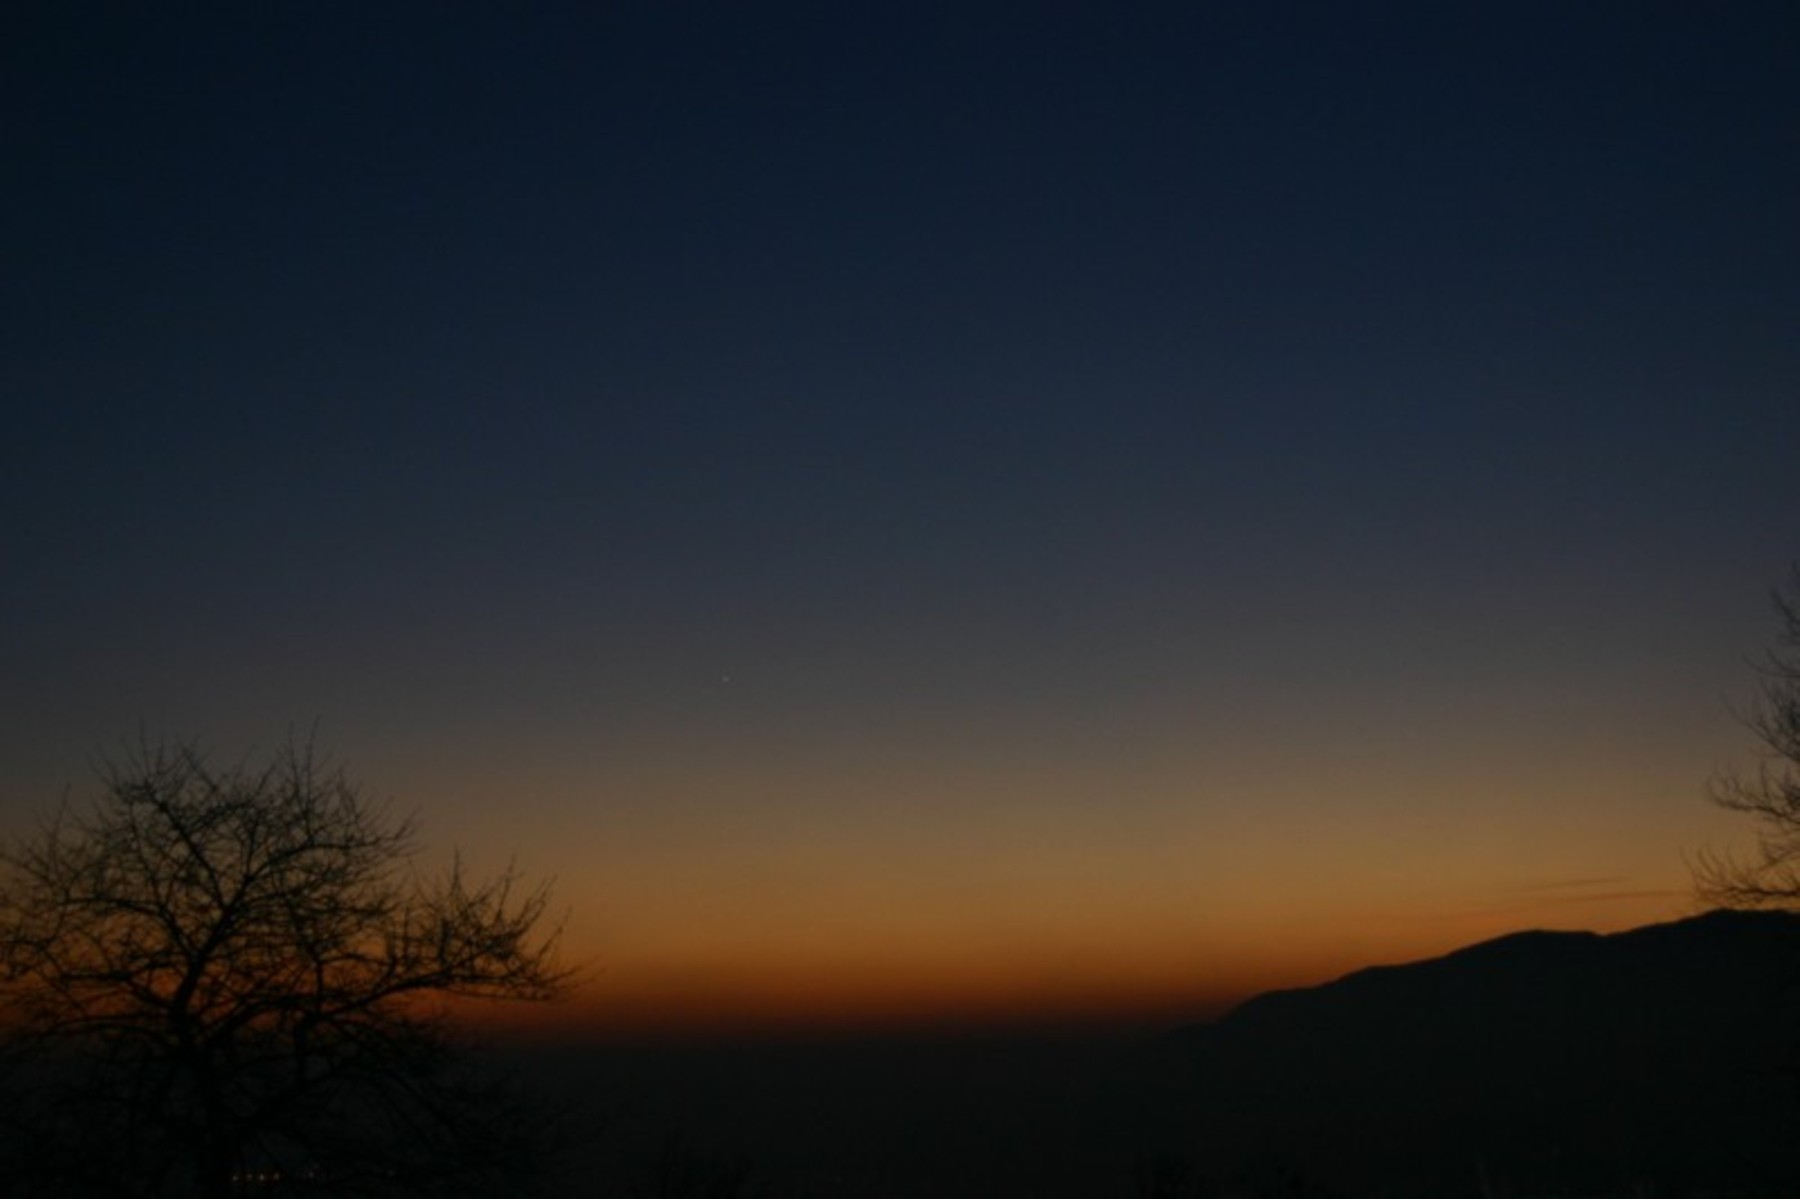 Sunset with Venus and McNaught comet: 109 kB; click on the image to enlarge